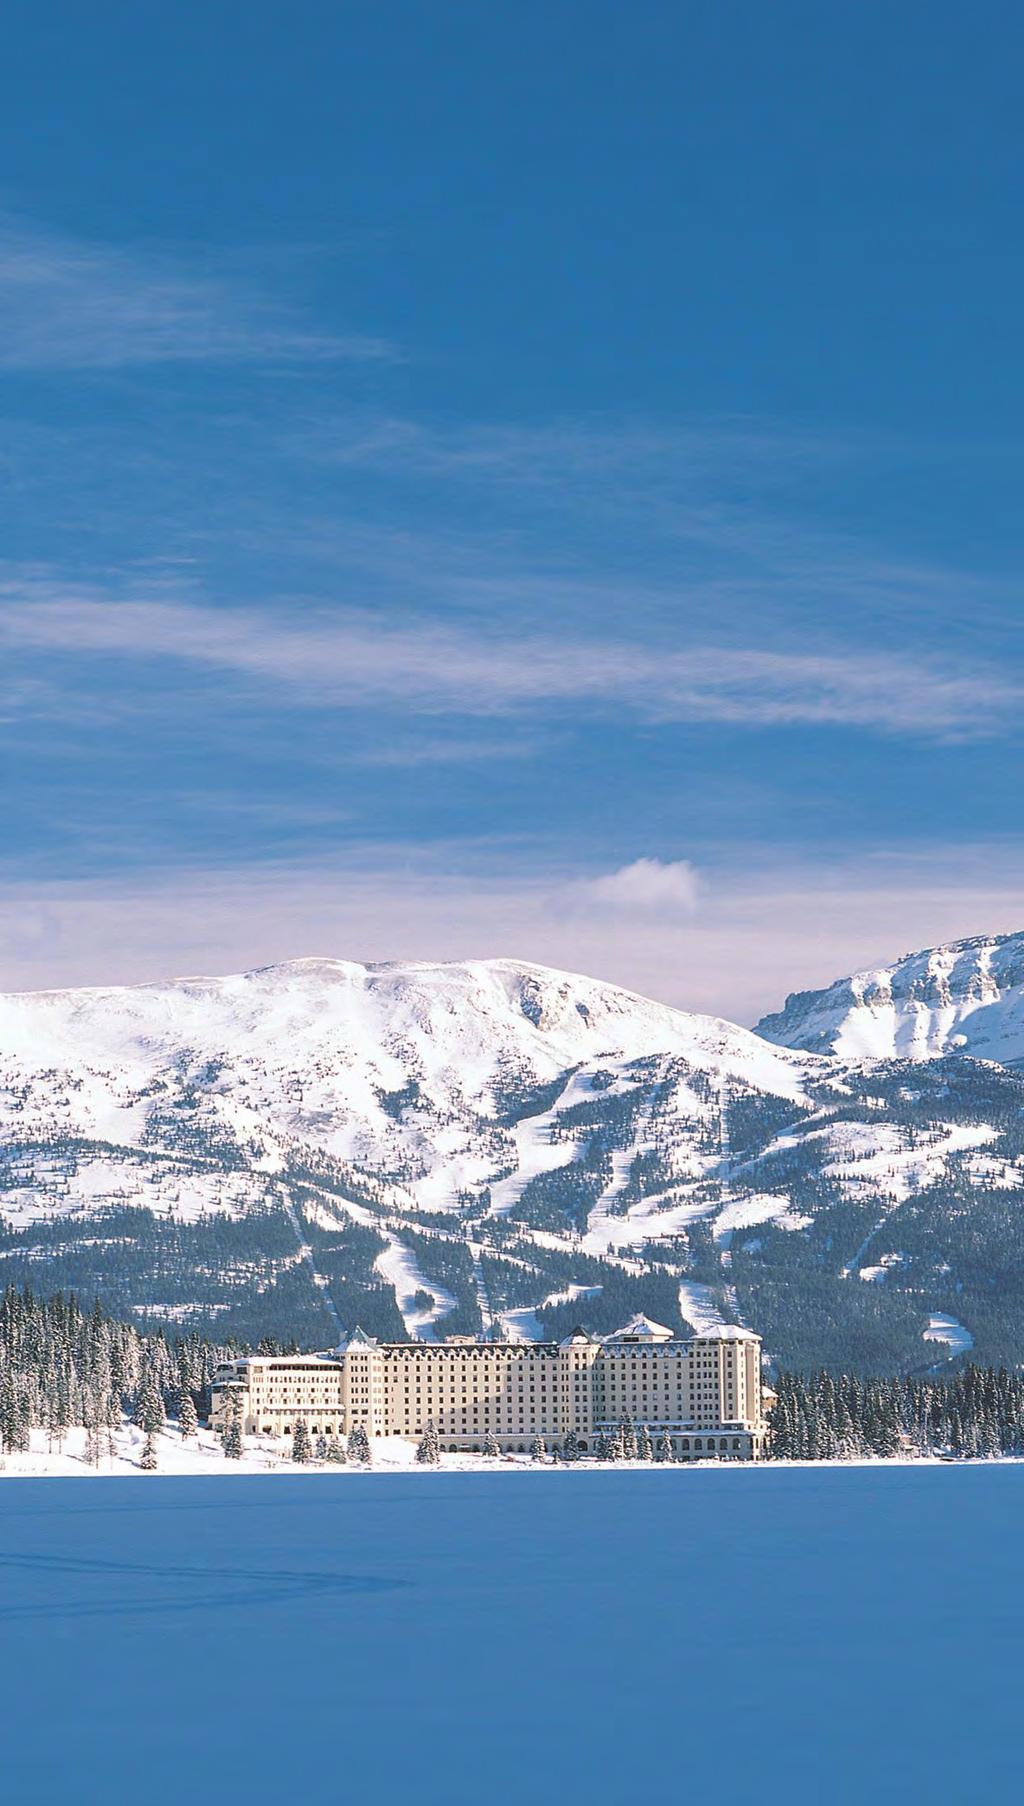 Tucked away in the most breathtaking corner of the Canadian Rockies is the legendary Fairmont Chateau Lake